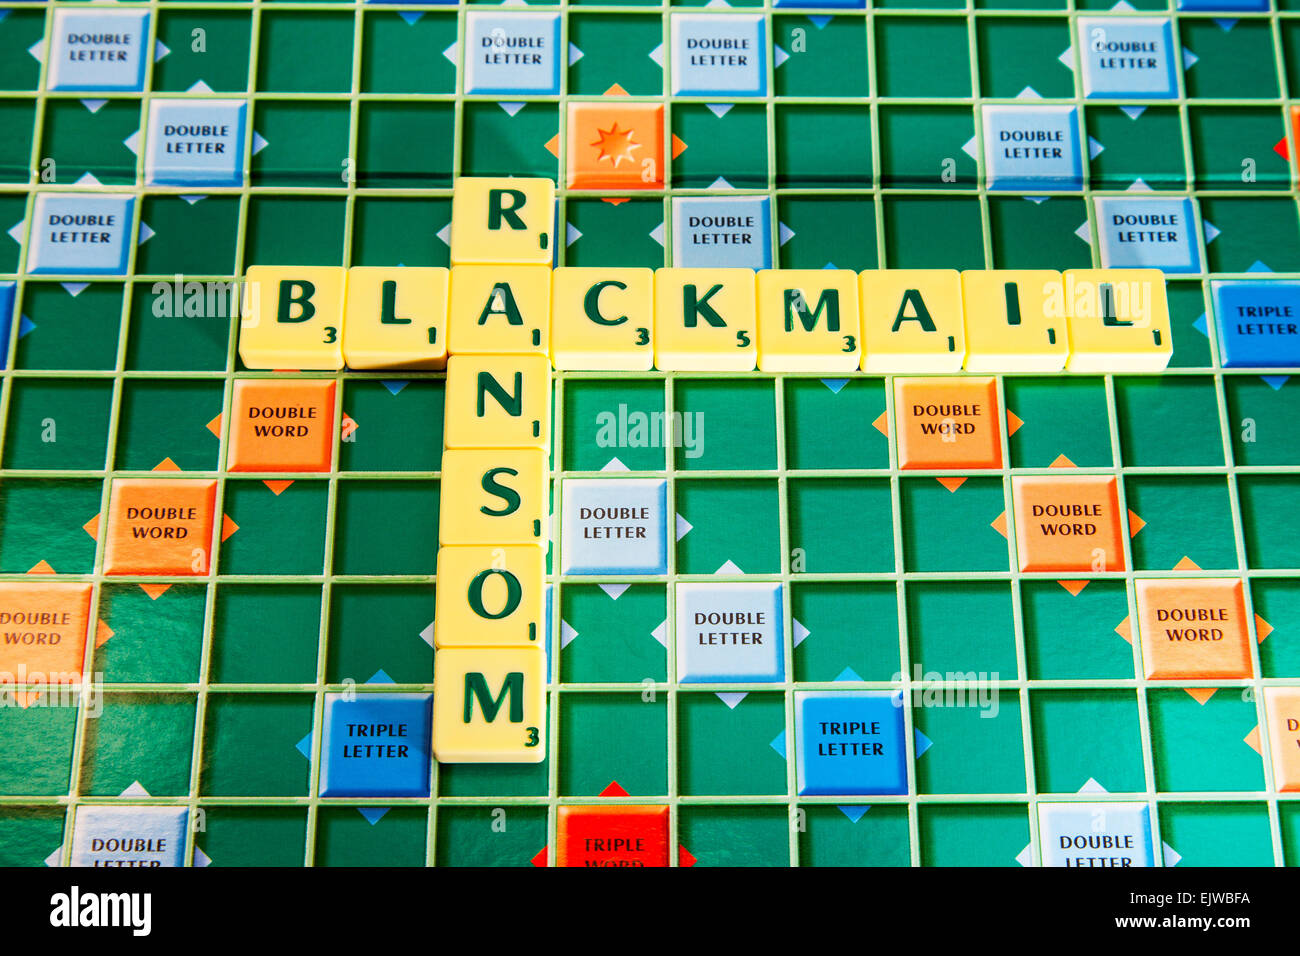 blackmail ransom money extortion extort fraud scare criminal tactics tactic words using scrabble tiles to illustrate spelling Stock Photo